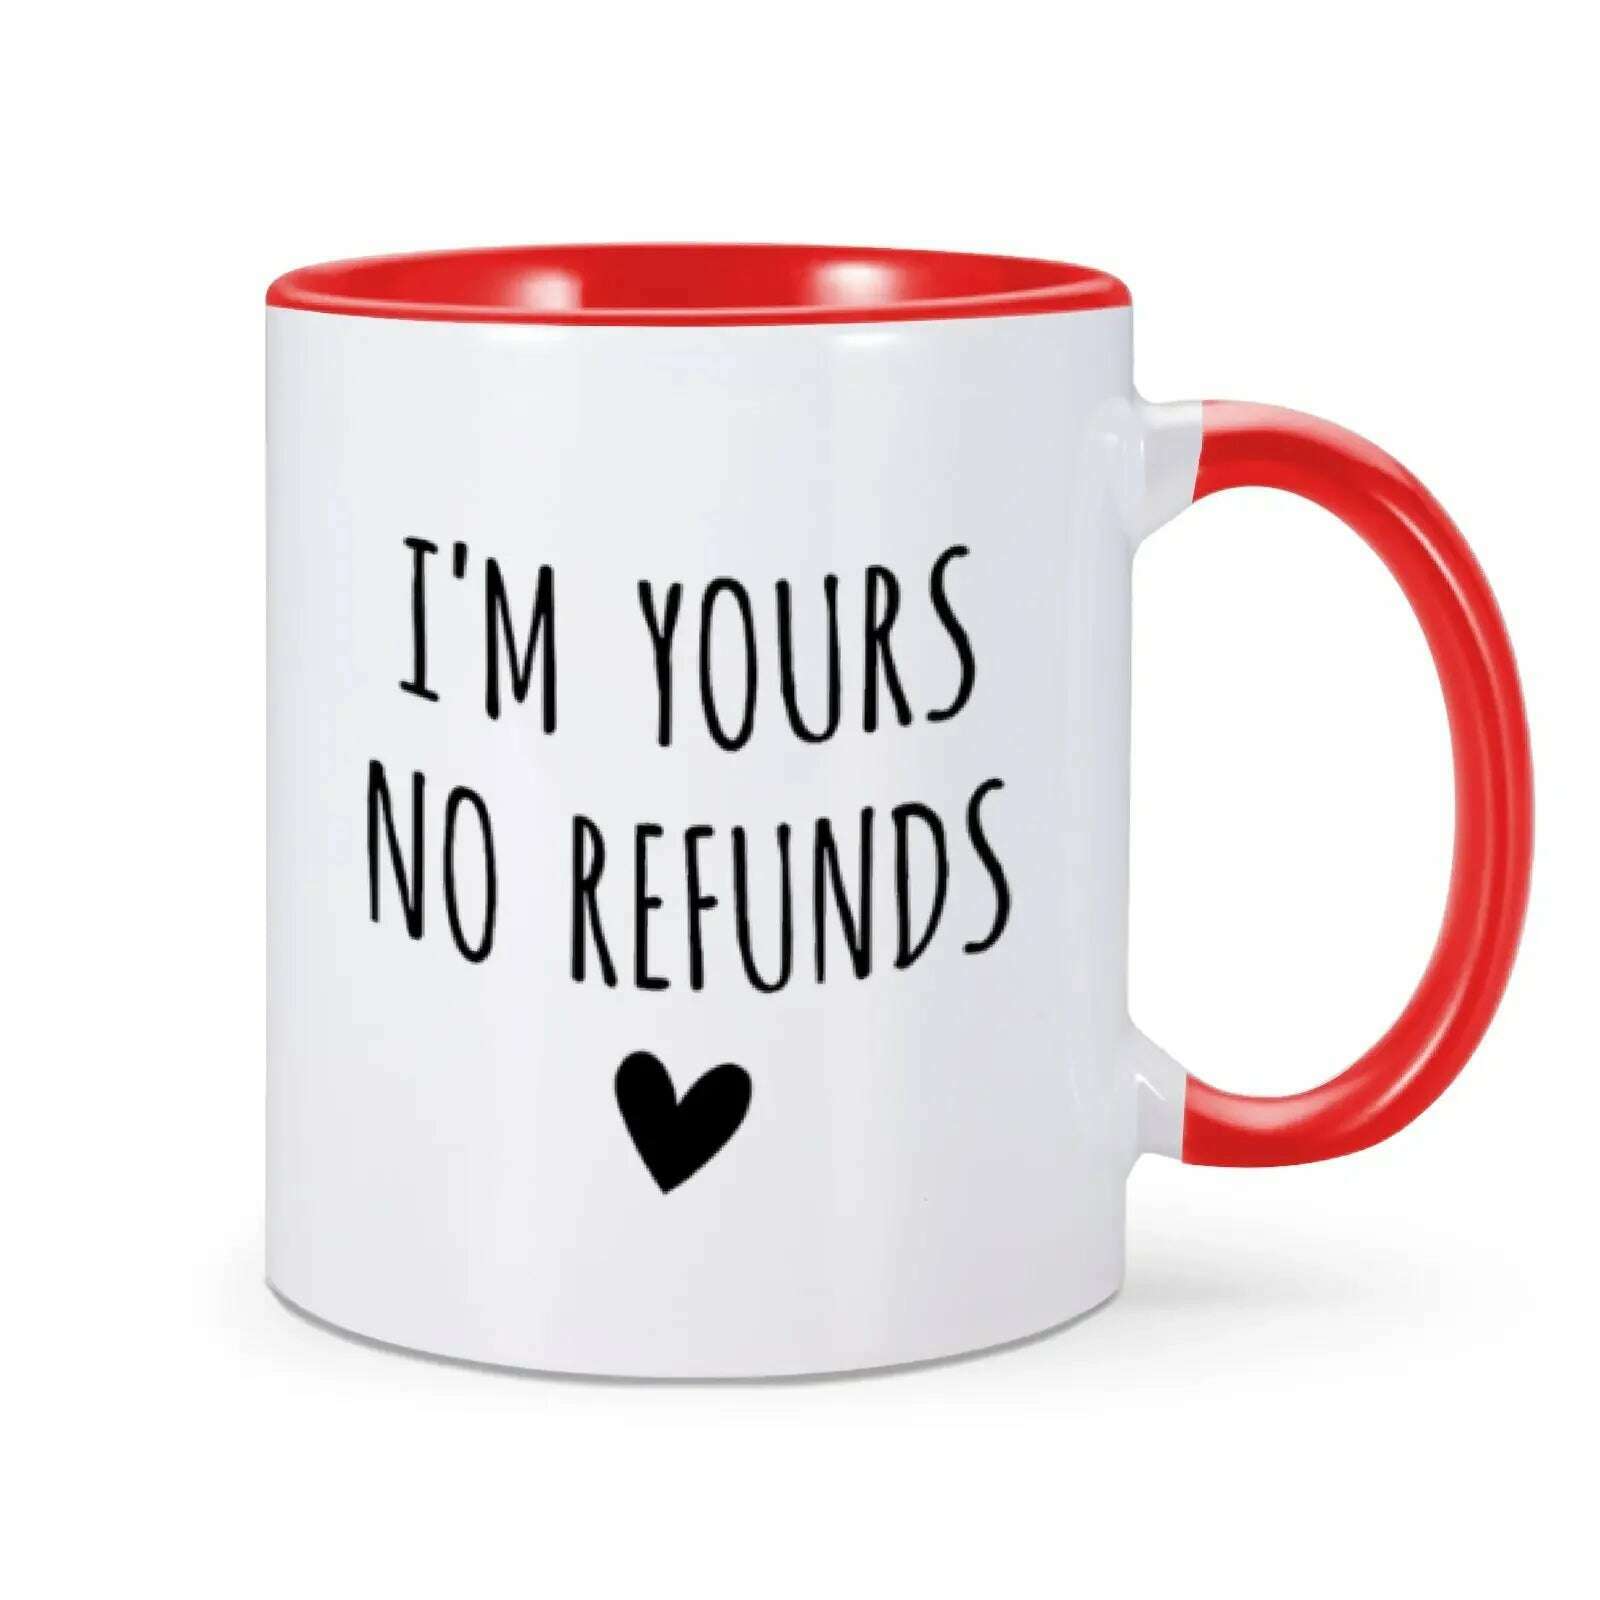 KIMLUD, I'm Yours No Refunds Mug Valentine's Day Mug Valentines Gift for Him Her Husband Wife Funny Coffee Cup for Women Men 11 Oz Mug, Red / 11oz, KIMLUD Womens Clothes